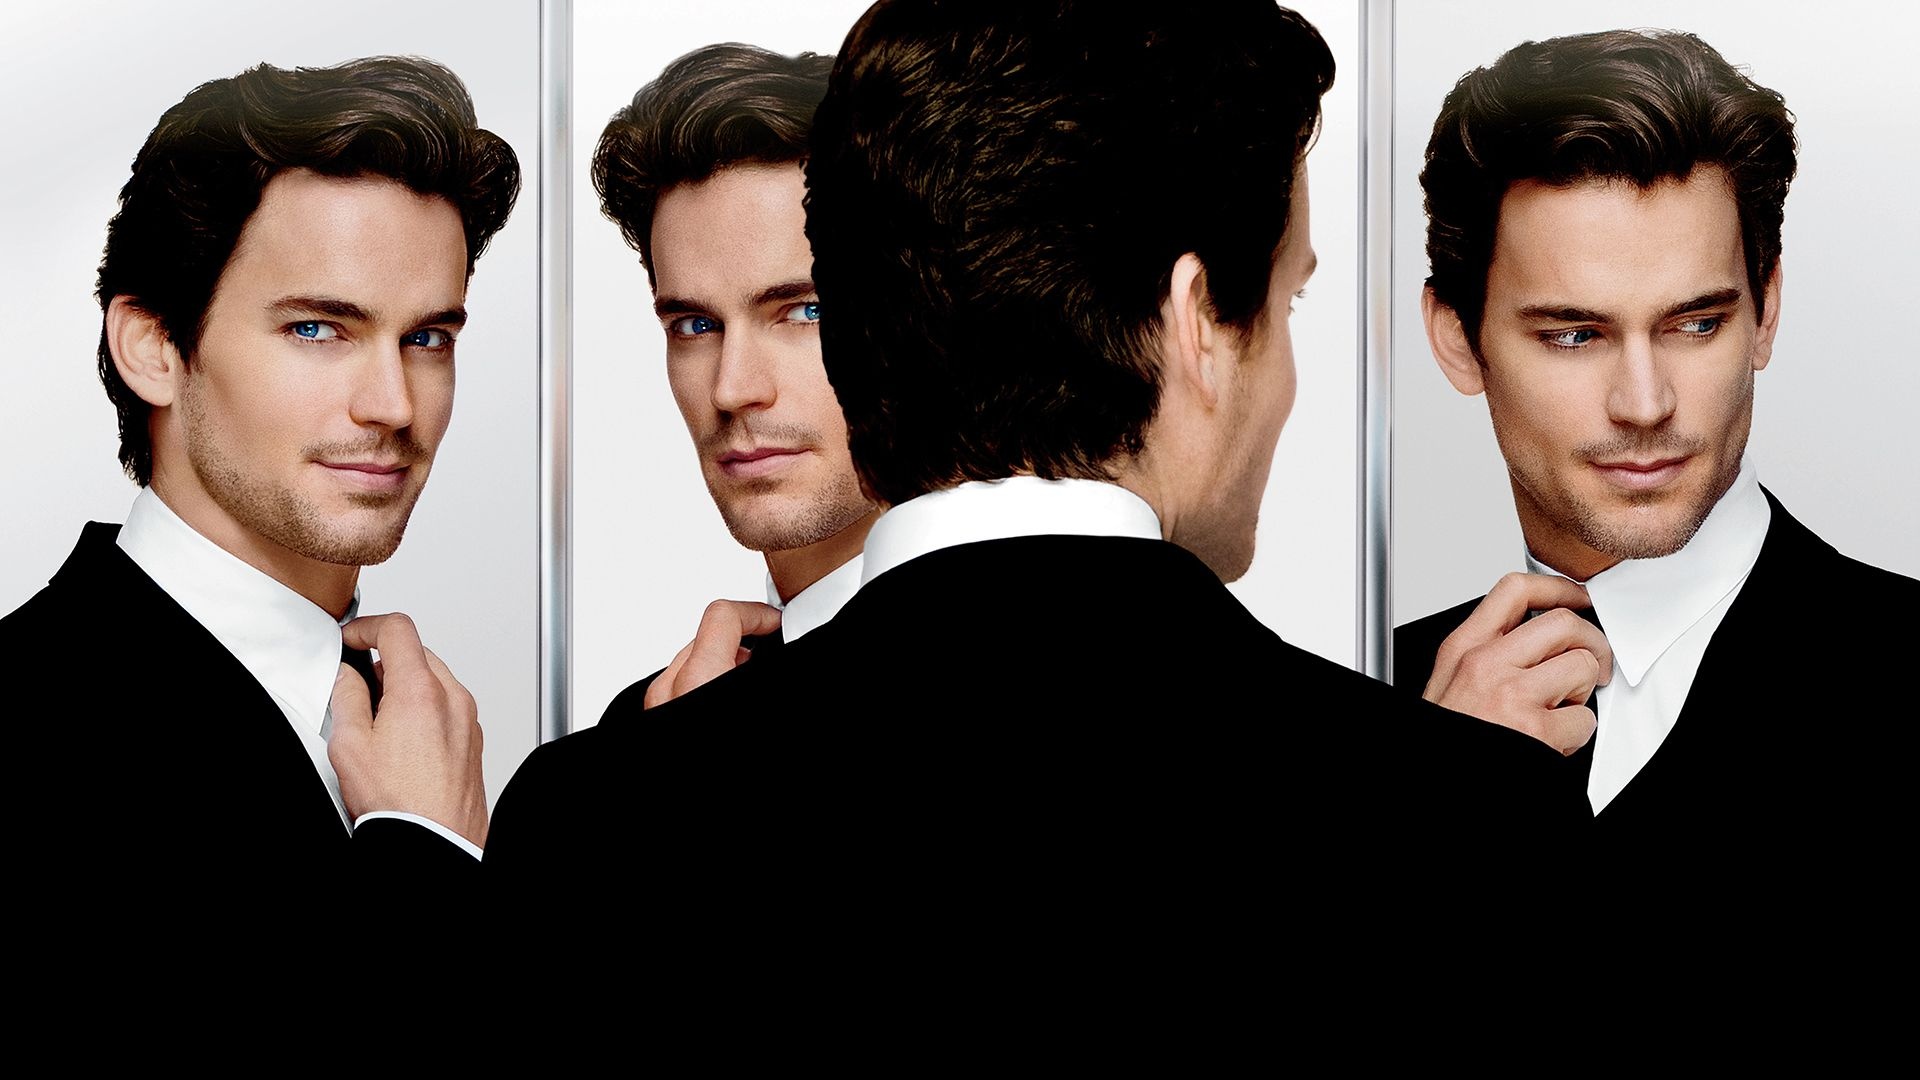 White Collar, Top free backgrounds, TV show wallpapers, White Collar, 1920x1080 Full HD Desktop